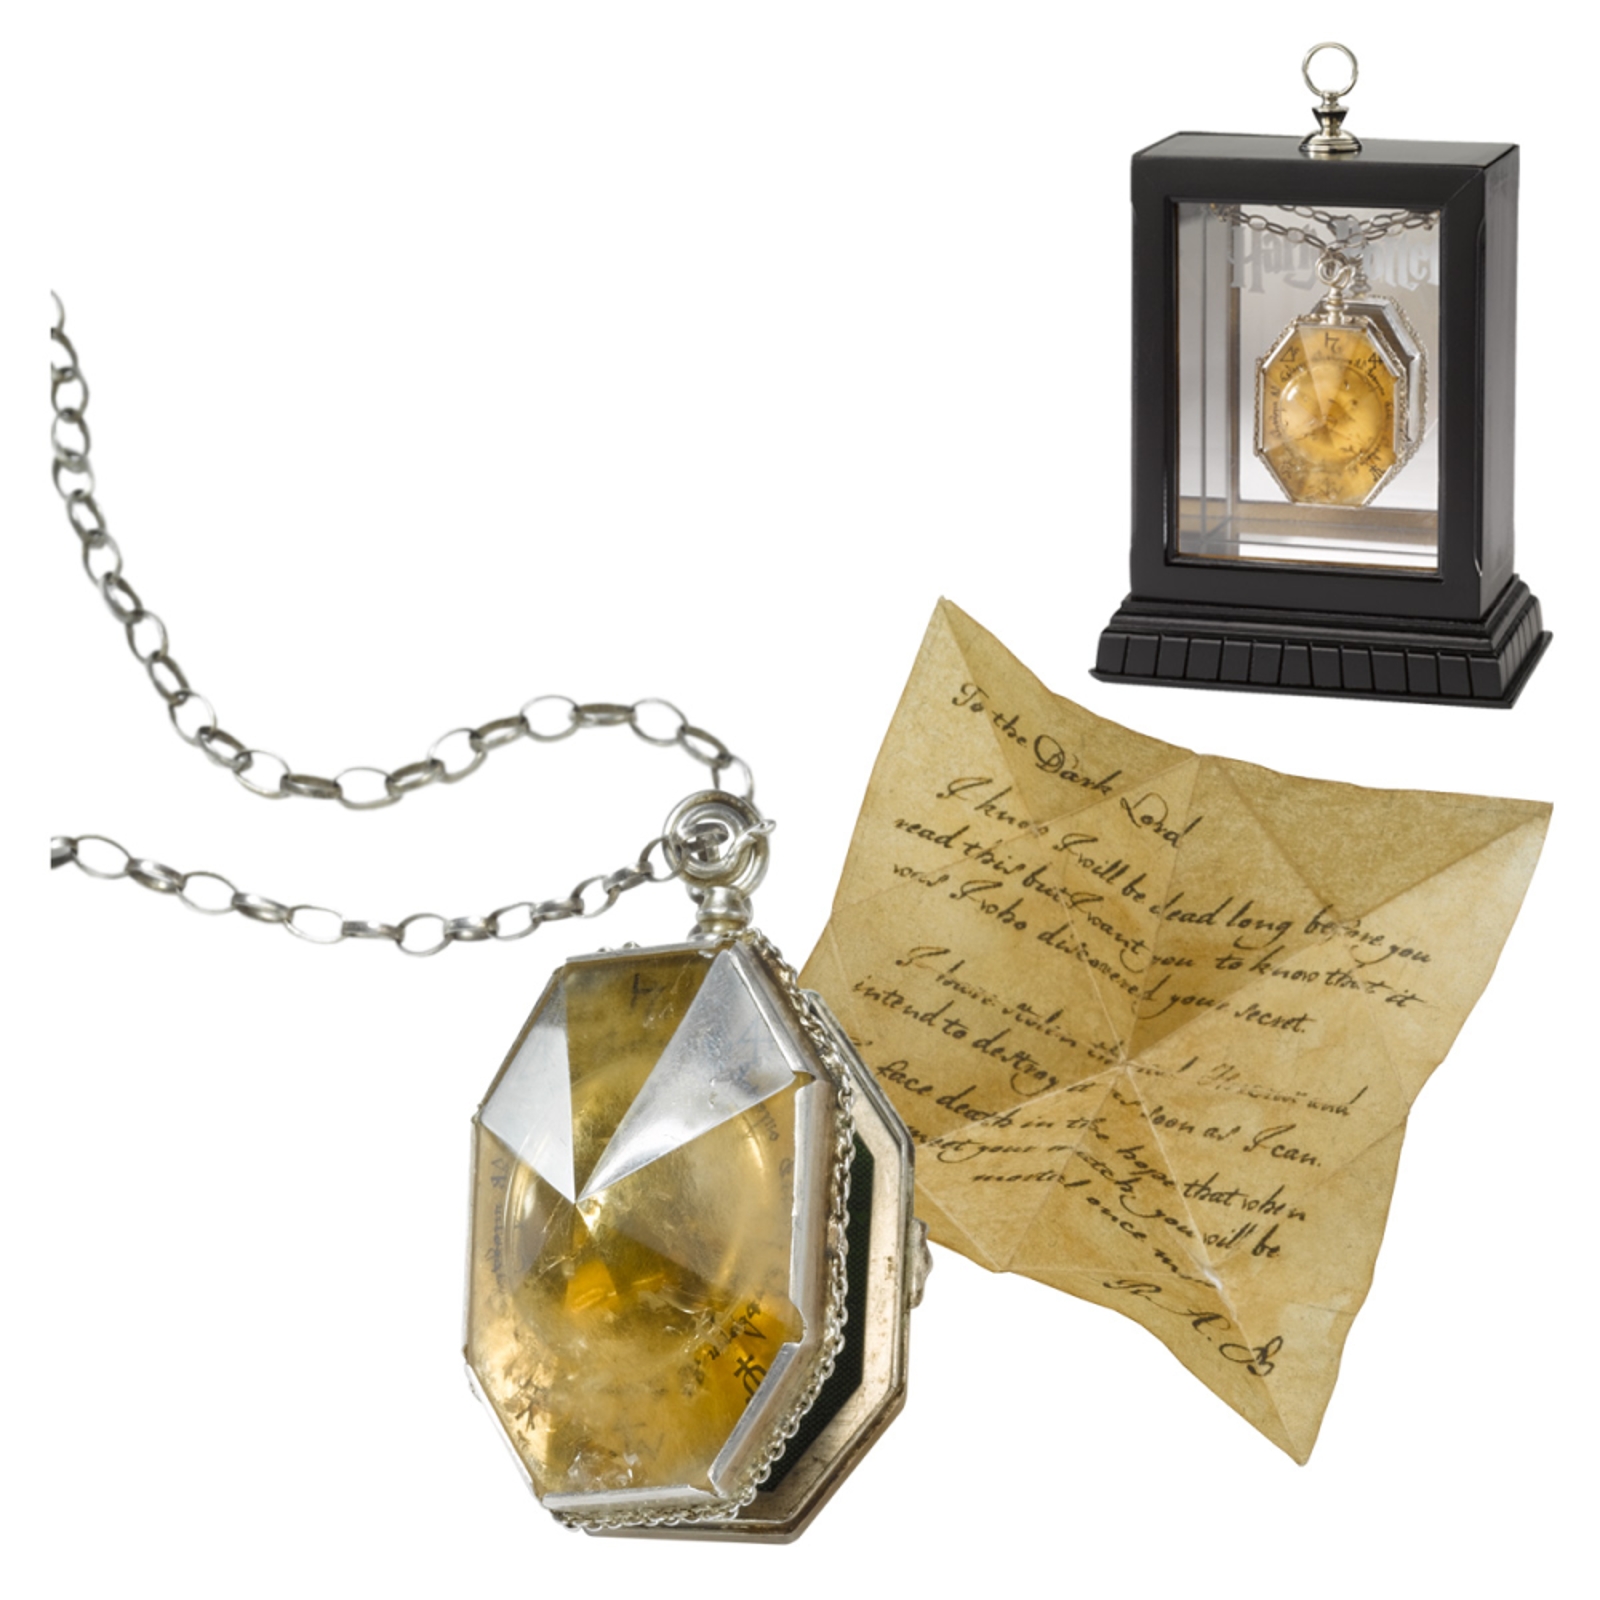 Harry Potter Film Replica - The Locket from the Cave in Display Case